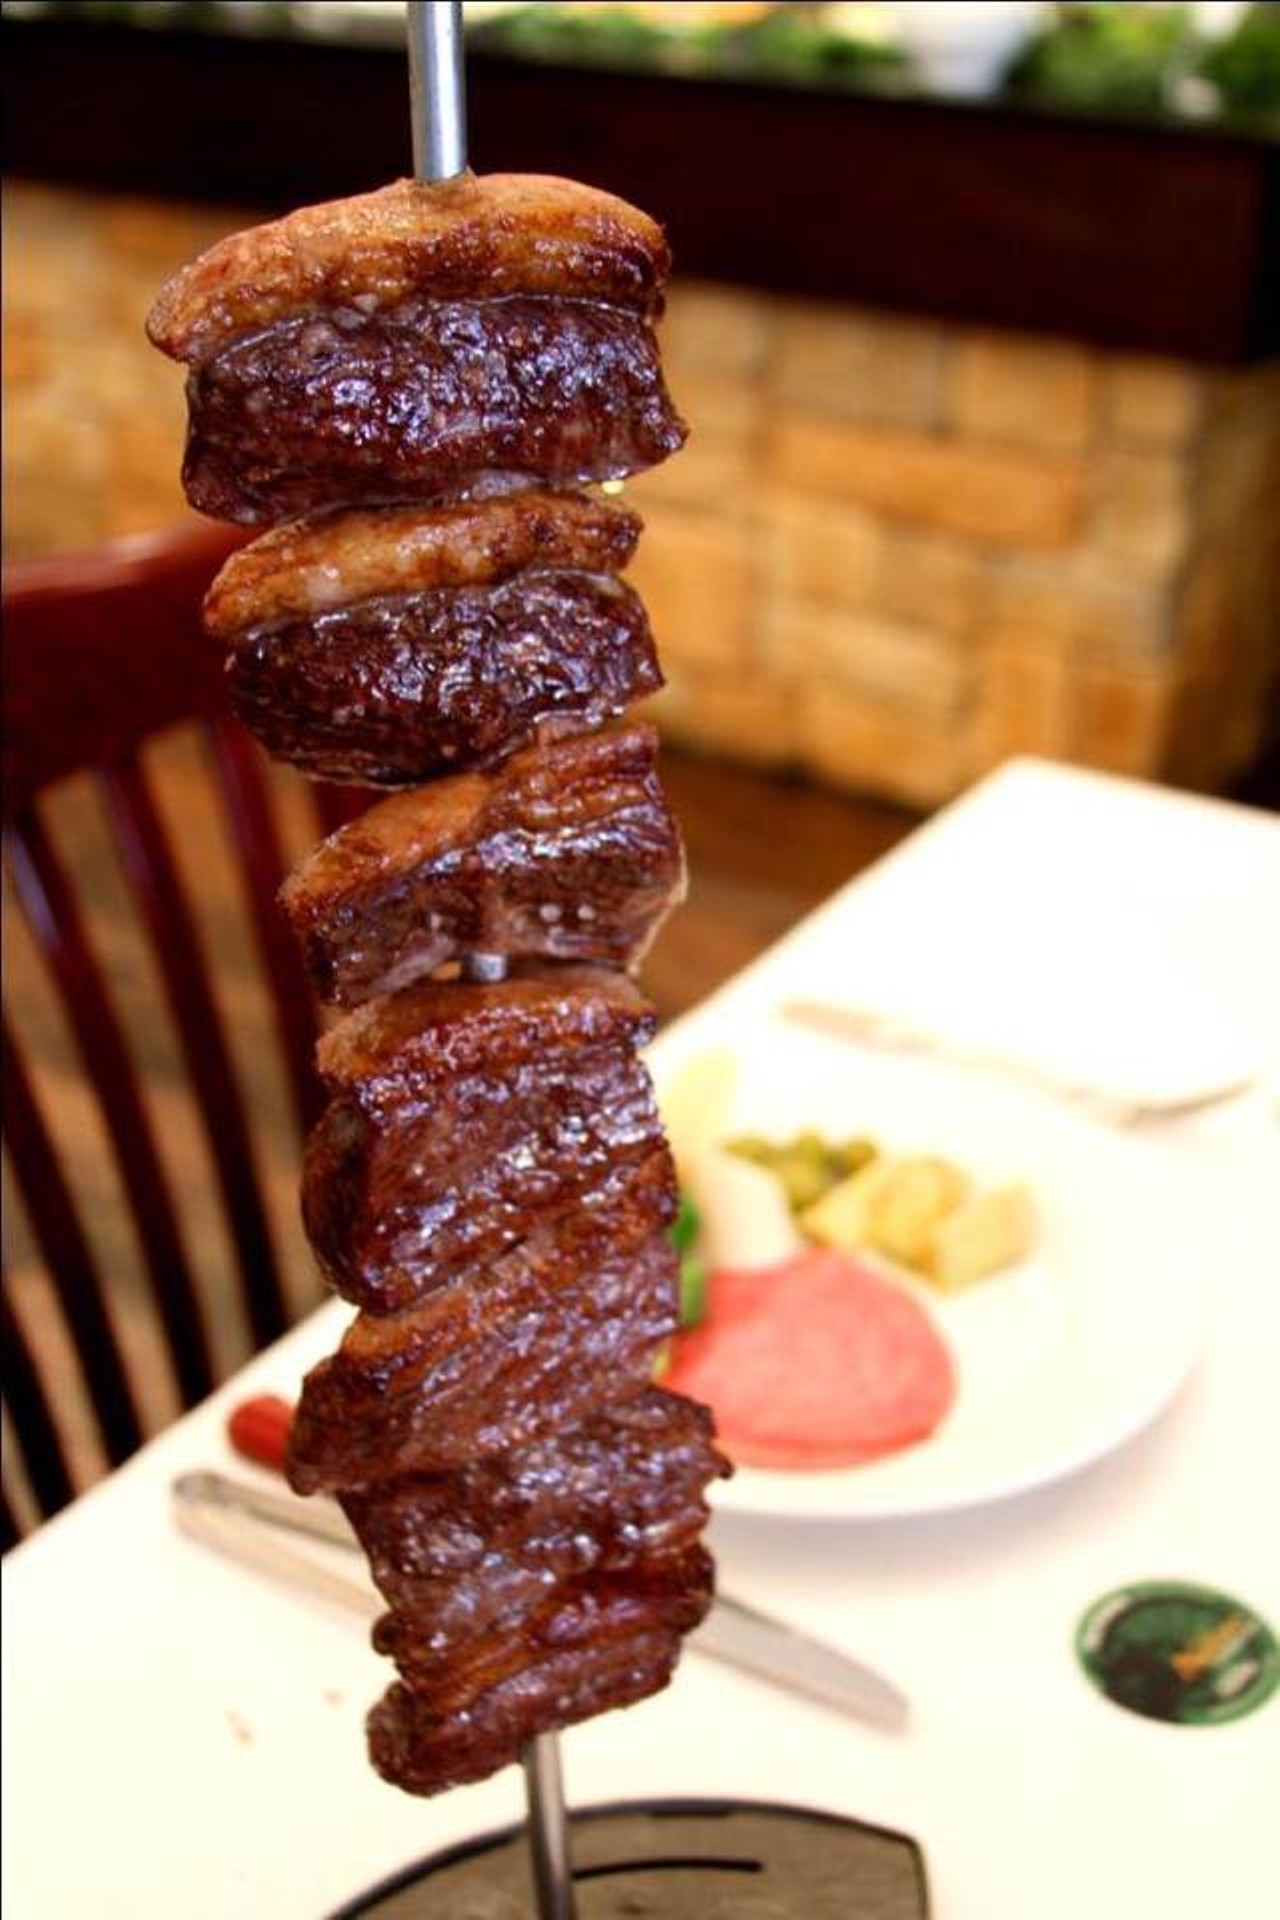 Nelore Churrascaria
Park Avenue churrascaria offers?up an awesome 40-item salad bar, comprising crisp vegetables, fish, soup and more, but it&#146;s the all-you-can-eat-meat extravaganza that packs &#146;em in. Our advice: Stick to the sirloin cuts (top sirloin and picanha) and avoid the lamb. Scrumptious Brazilian desserts are made in-house. 115 E. Lyman Ave., Winter Park, 407-645-1112; $$$$Restaurant review: Nelore ChurrascariaPhoto via Nelore Churrascaria Winter Park on Facebook